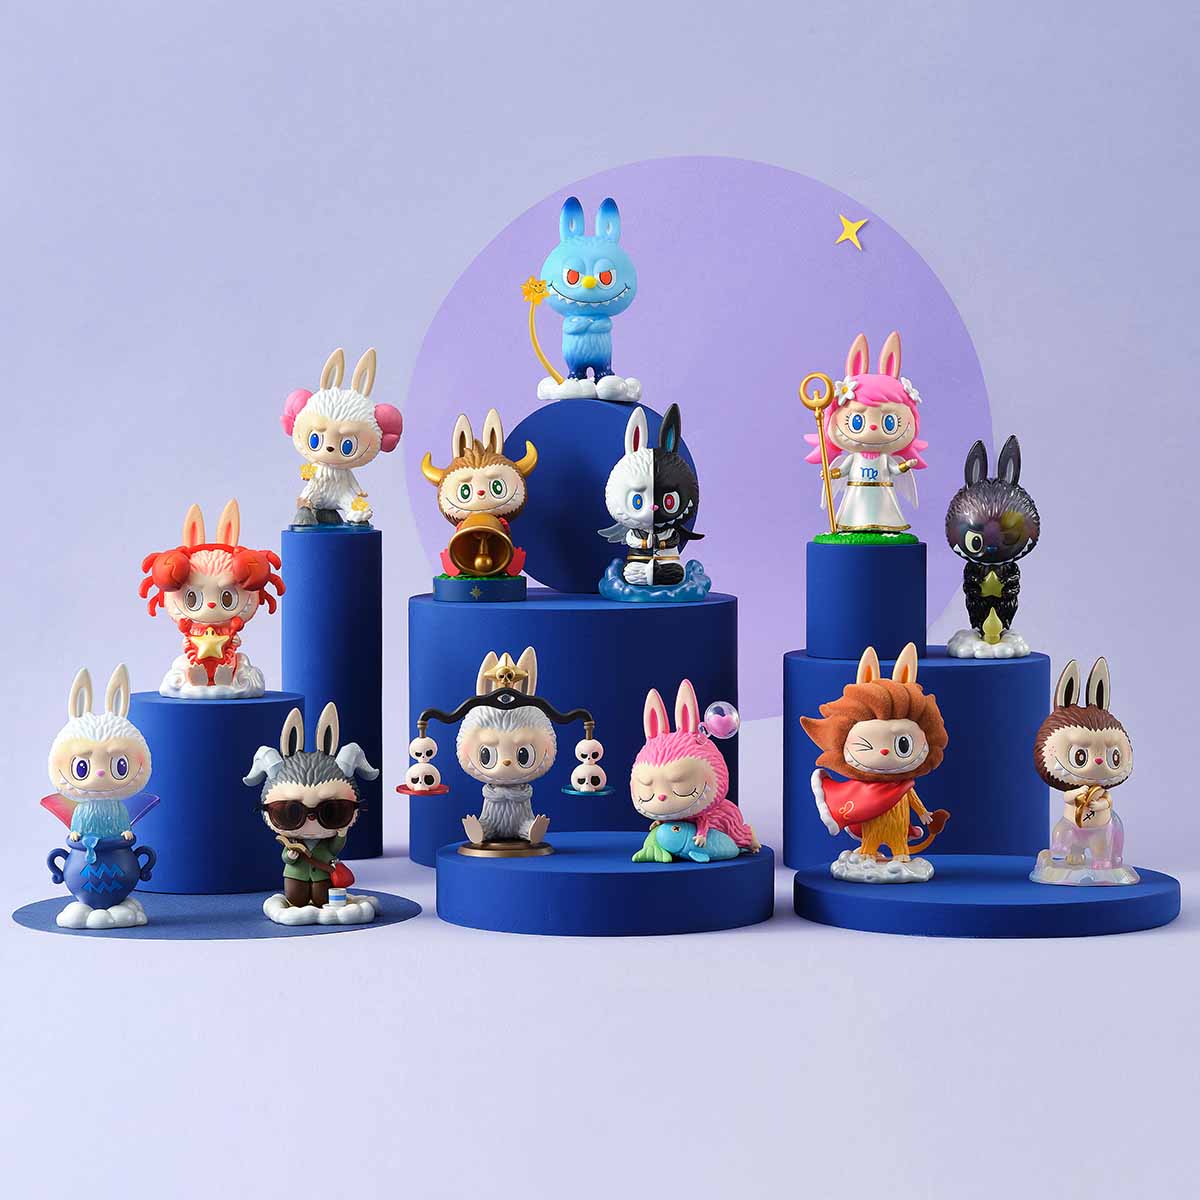 THE MONSTERS Constellation Series Figures - Blind Box - POP MART